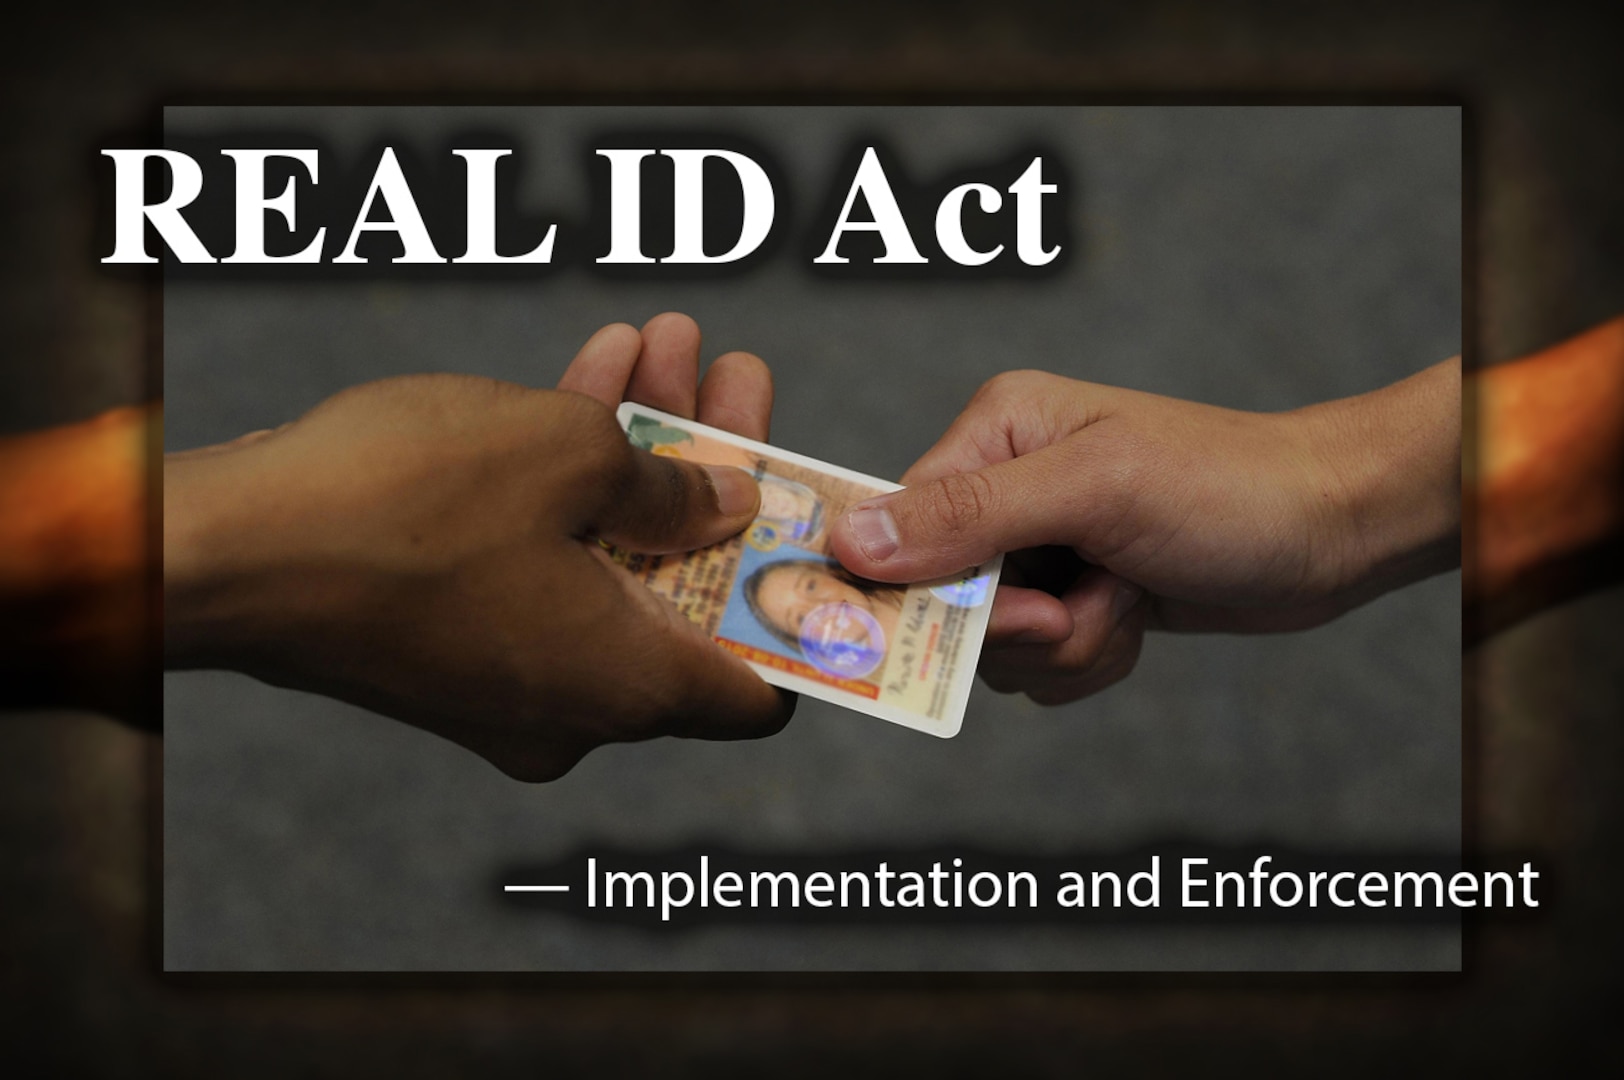 Any CAC or DoD ID is good to go, but a state driver’s license or state ID card might not be accepted for access to DoD or other federal facilities, depending on the state of issue.